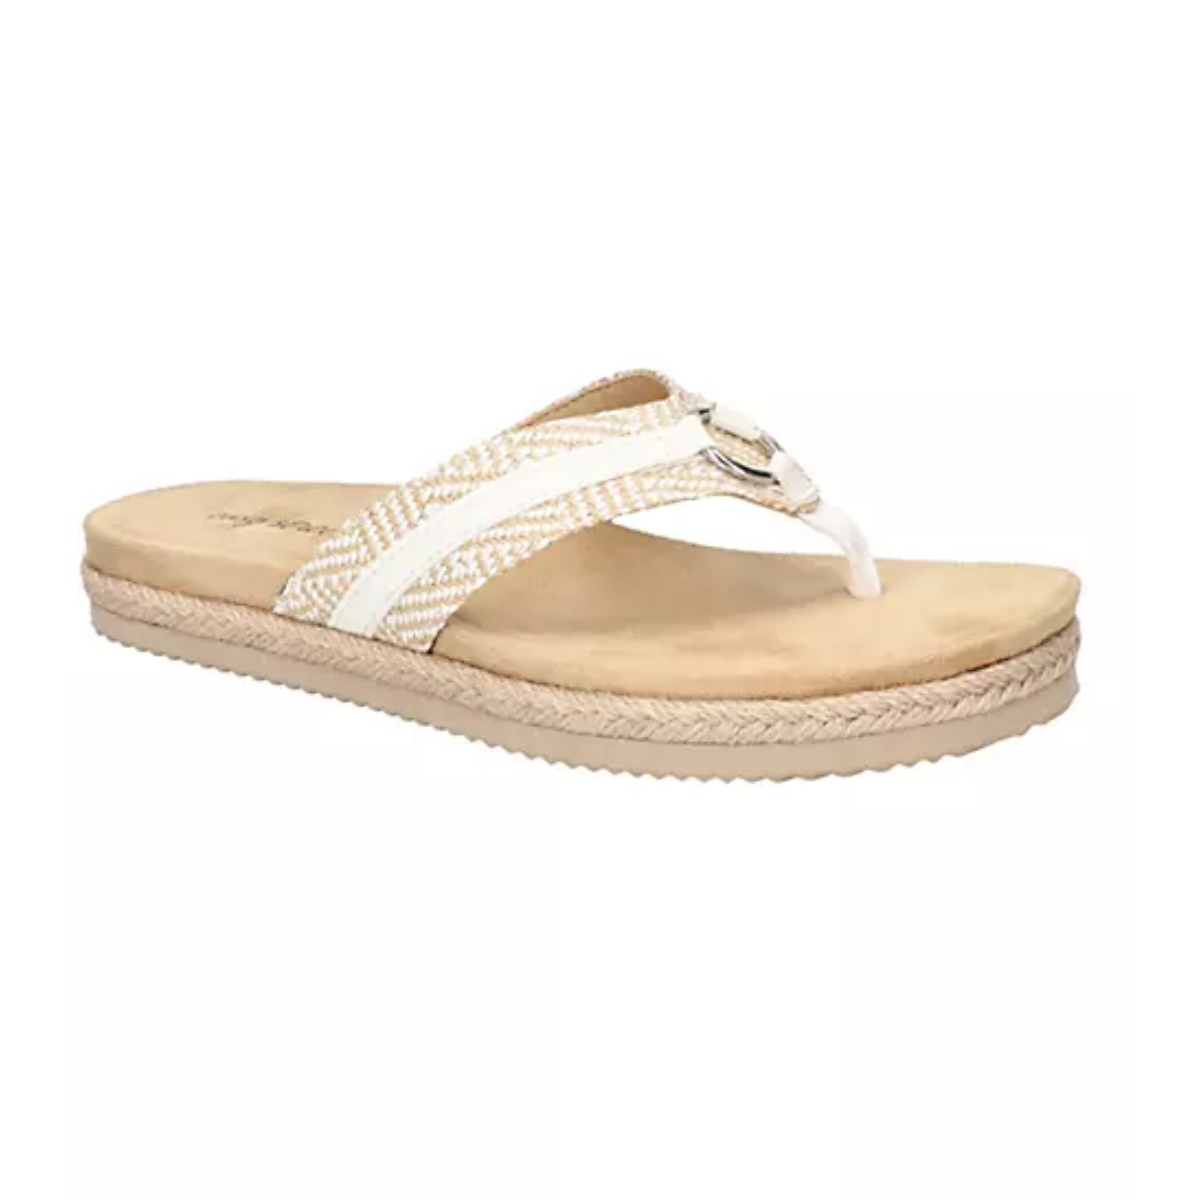 A women's Starling Woven in Beige flip flop sandals by Easy Street, featuring comfort and fashion accent.